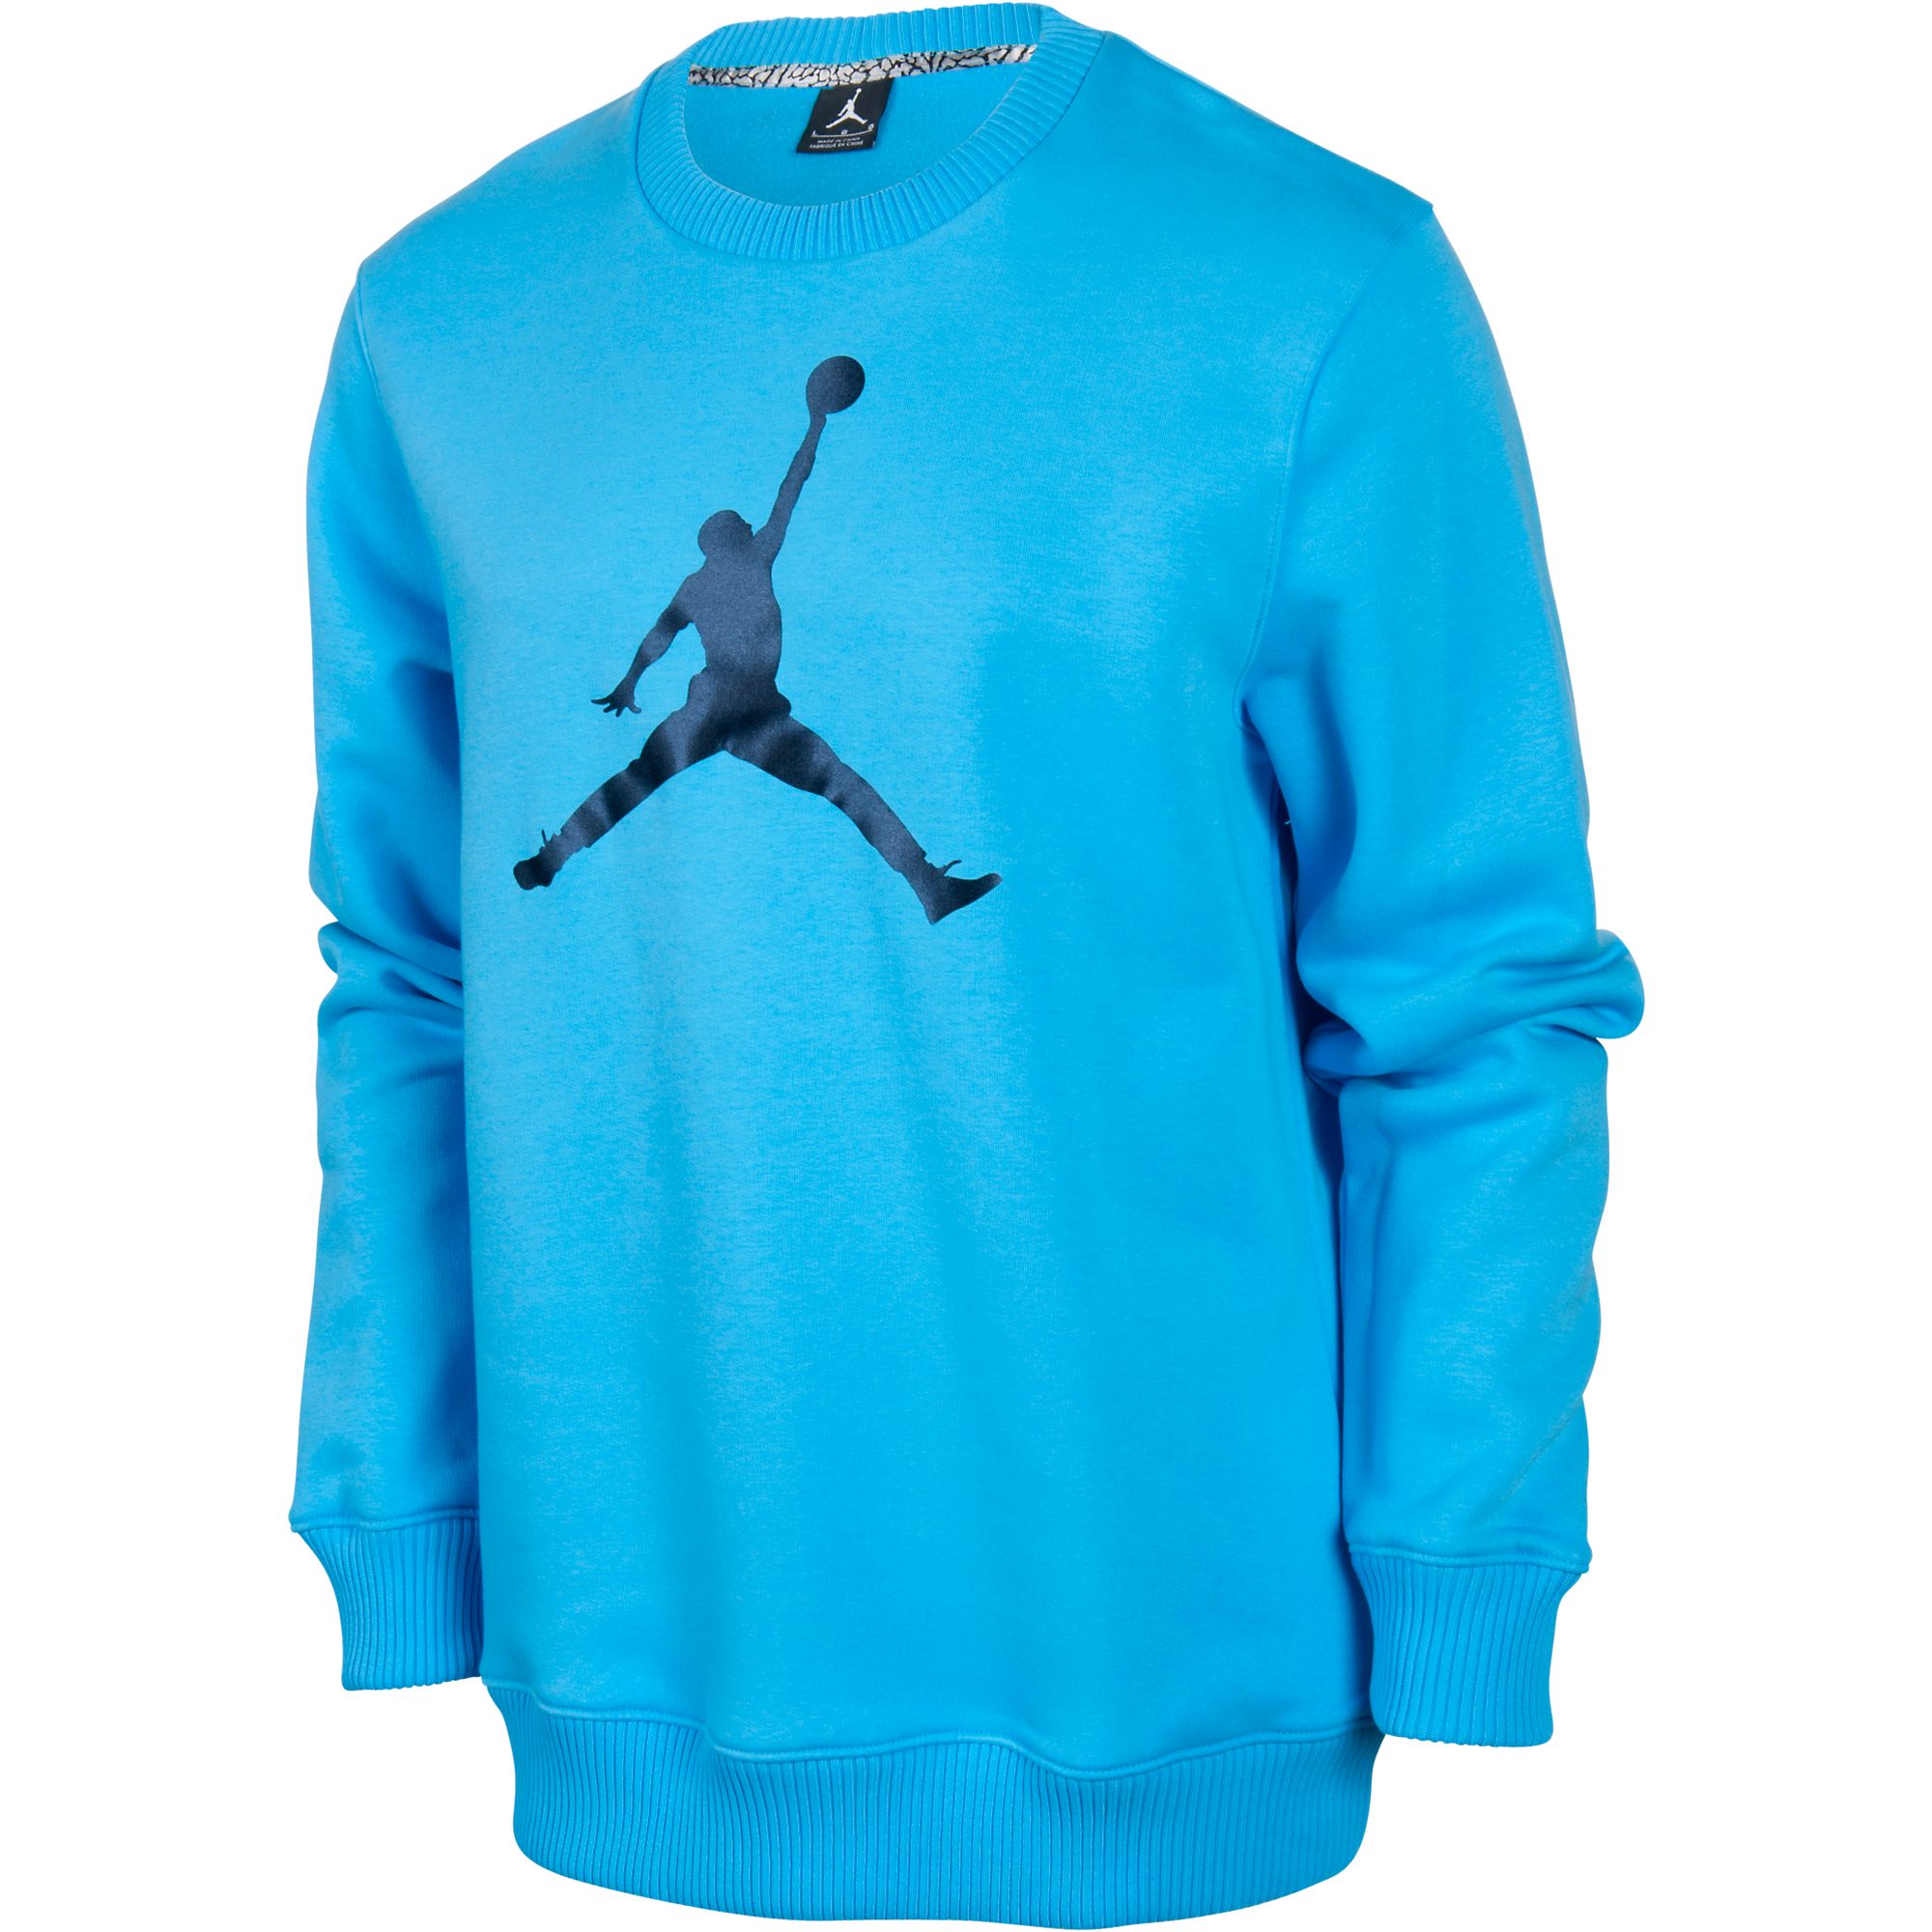 blue and black jordan outfit